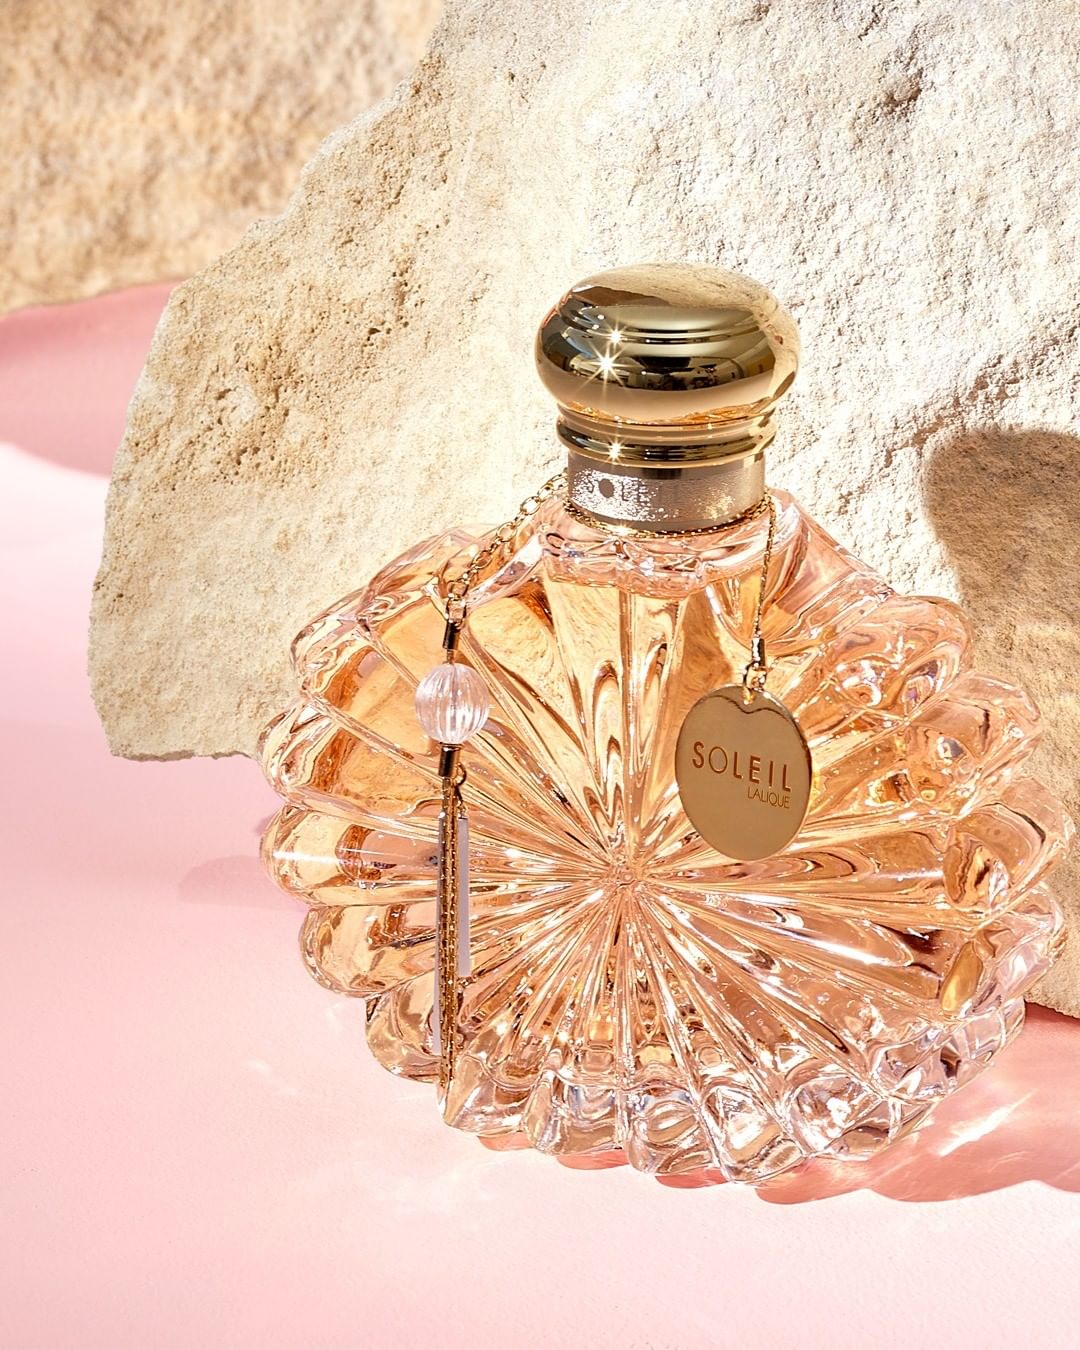 LALIQUE - The dazzling light of fruit & spices, the addictive treat of a gourmand heart and the silky caress of flowers and musks. Golden and warm as the rays of the sun, discover Soleil Lalique Eau d...